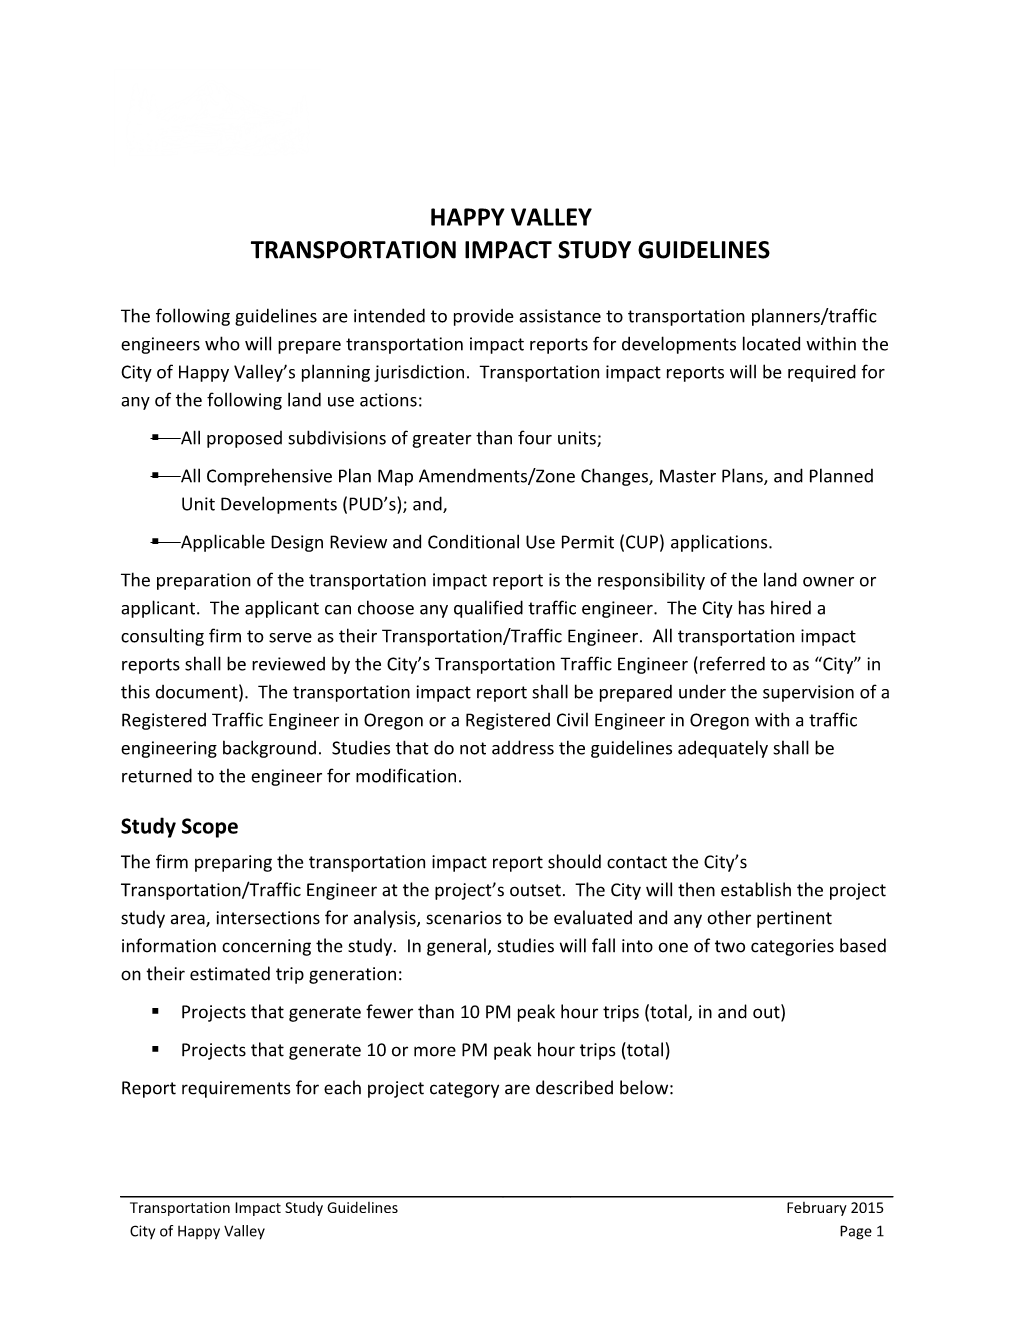 Transportation Impact Study Guidelines